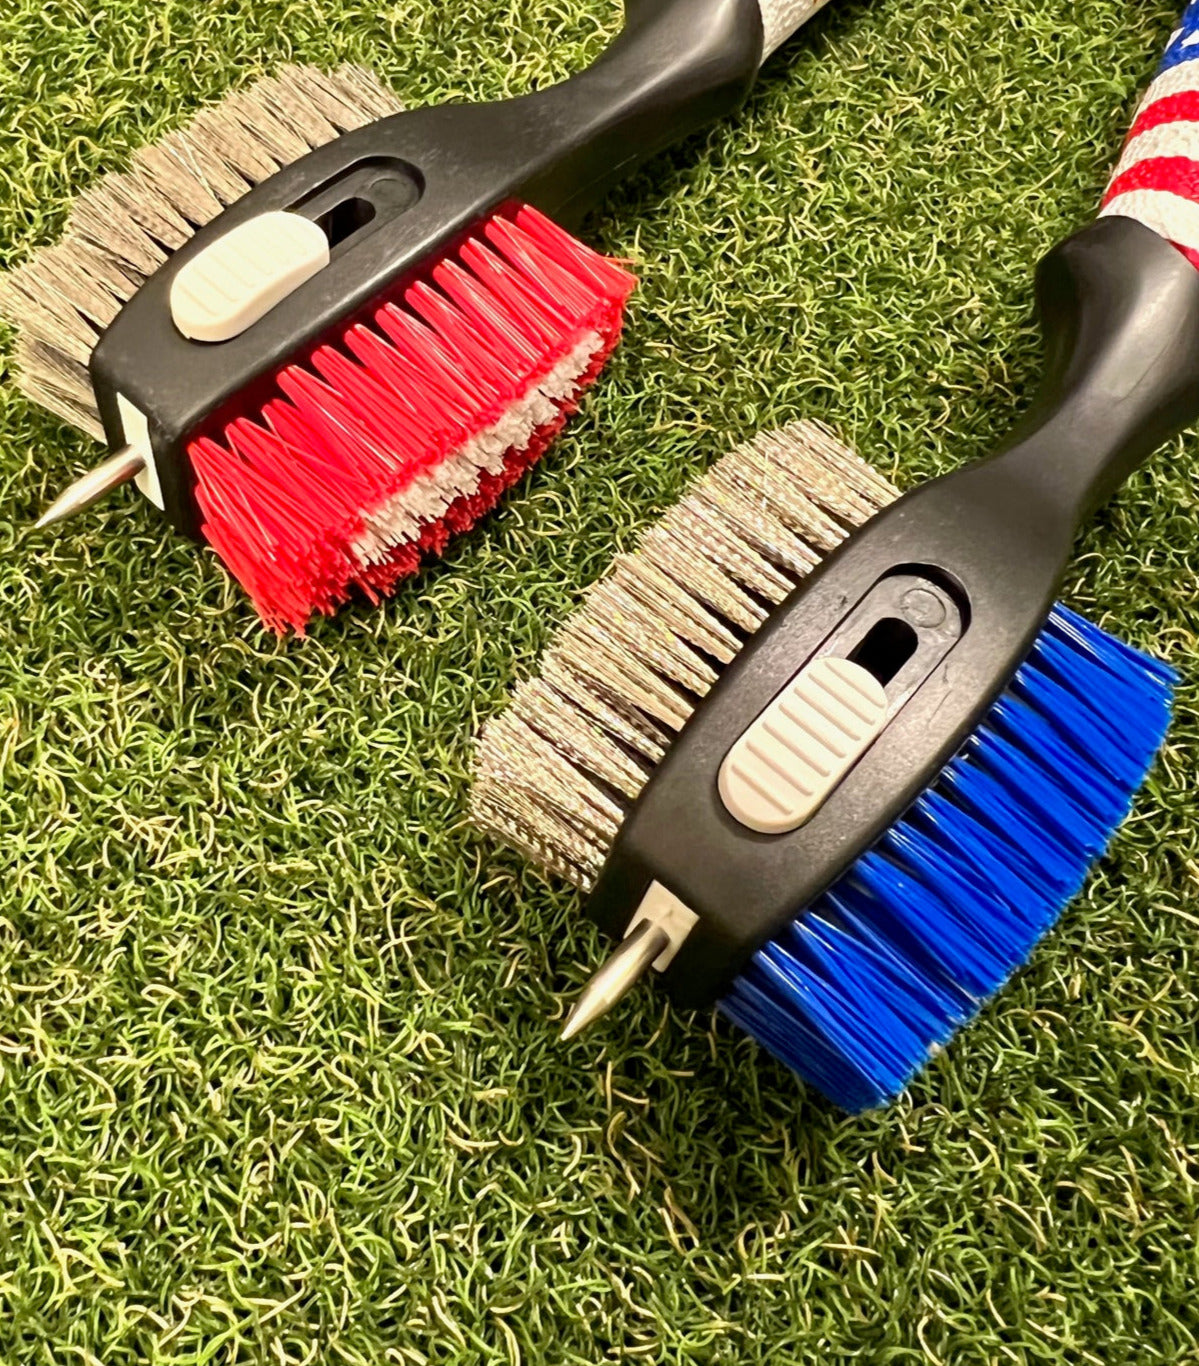 Premium Golf Club Cleaning Brush w/ Magnetic Release & Retractable Groove Spike